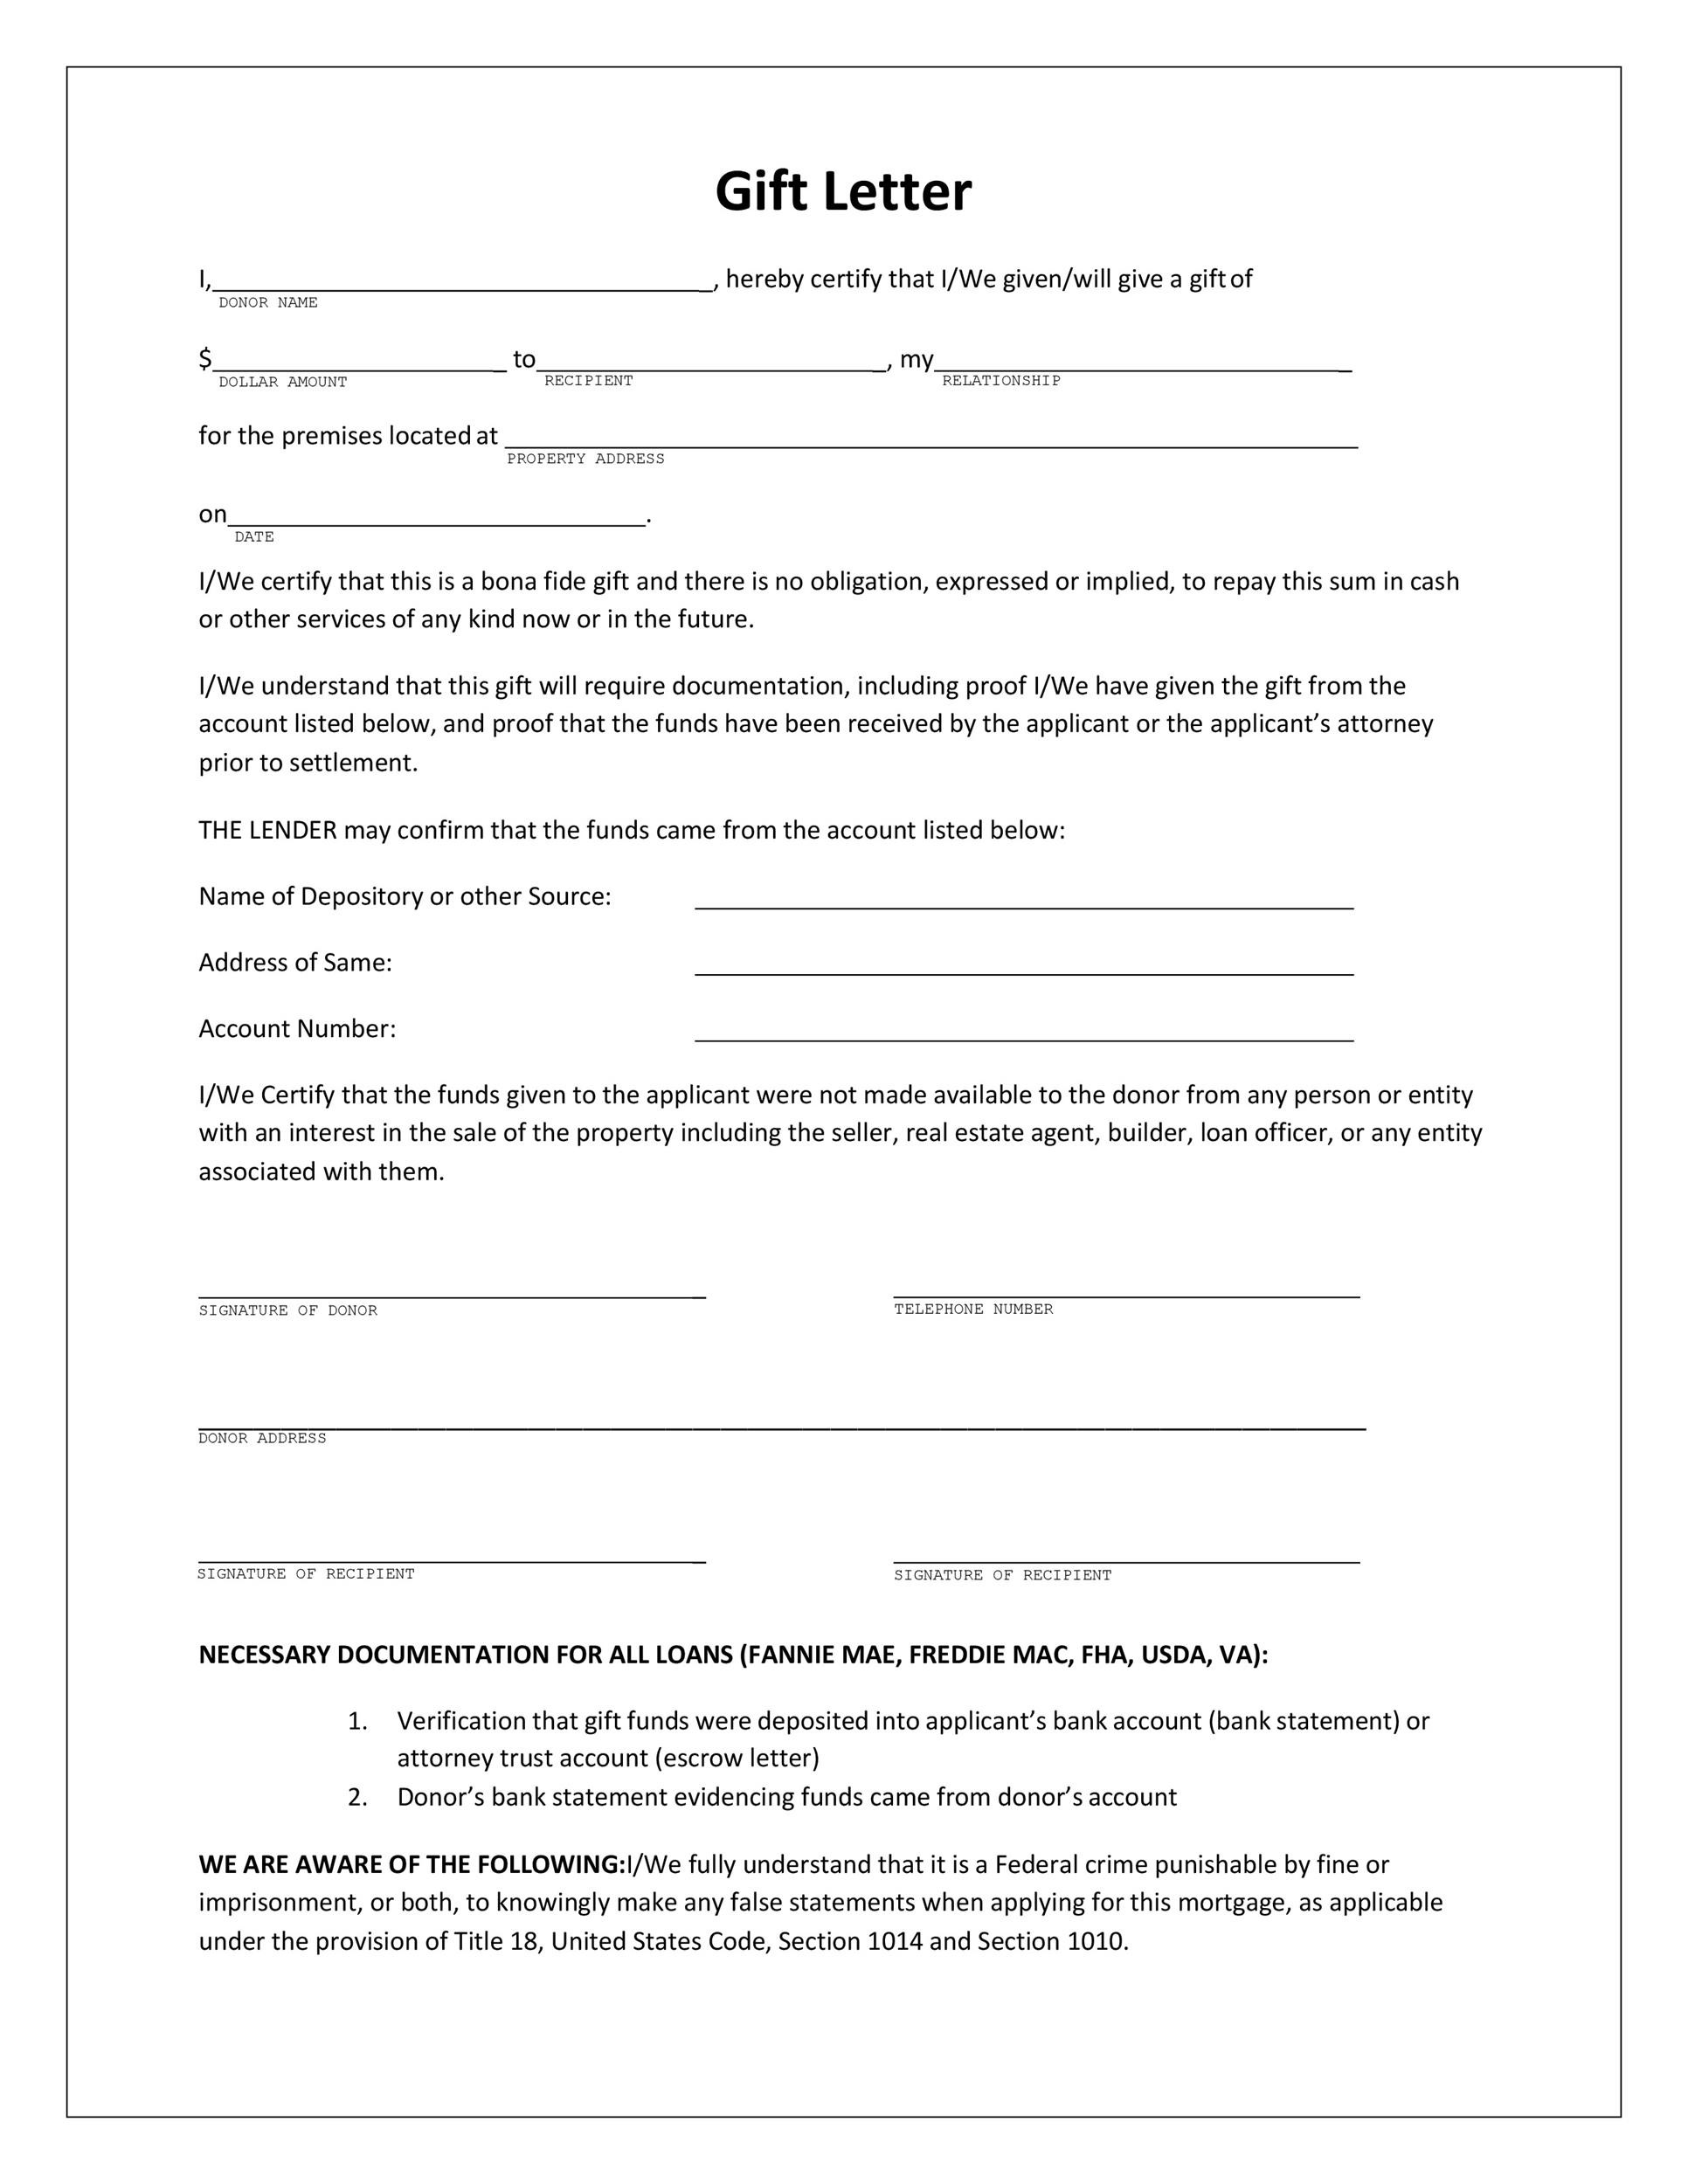 real-estate-gift-letter-template-tutore-org-master-of-documents